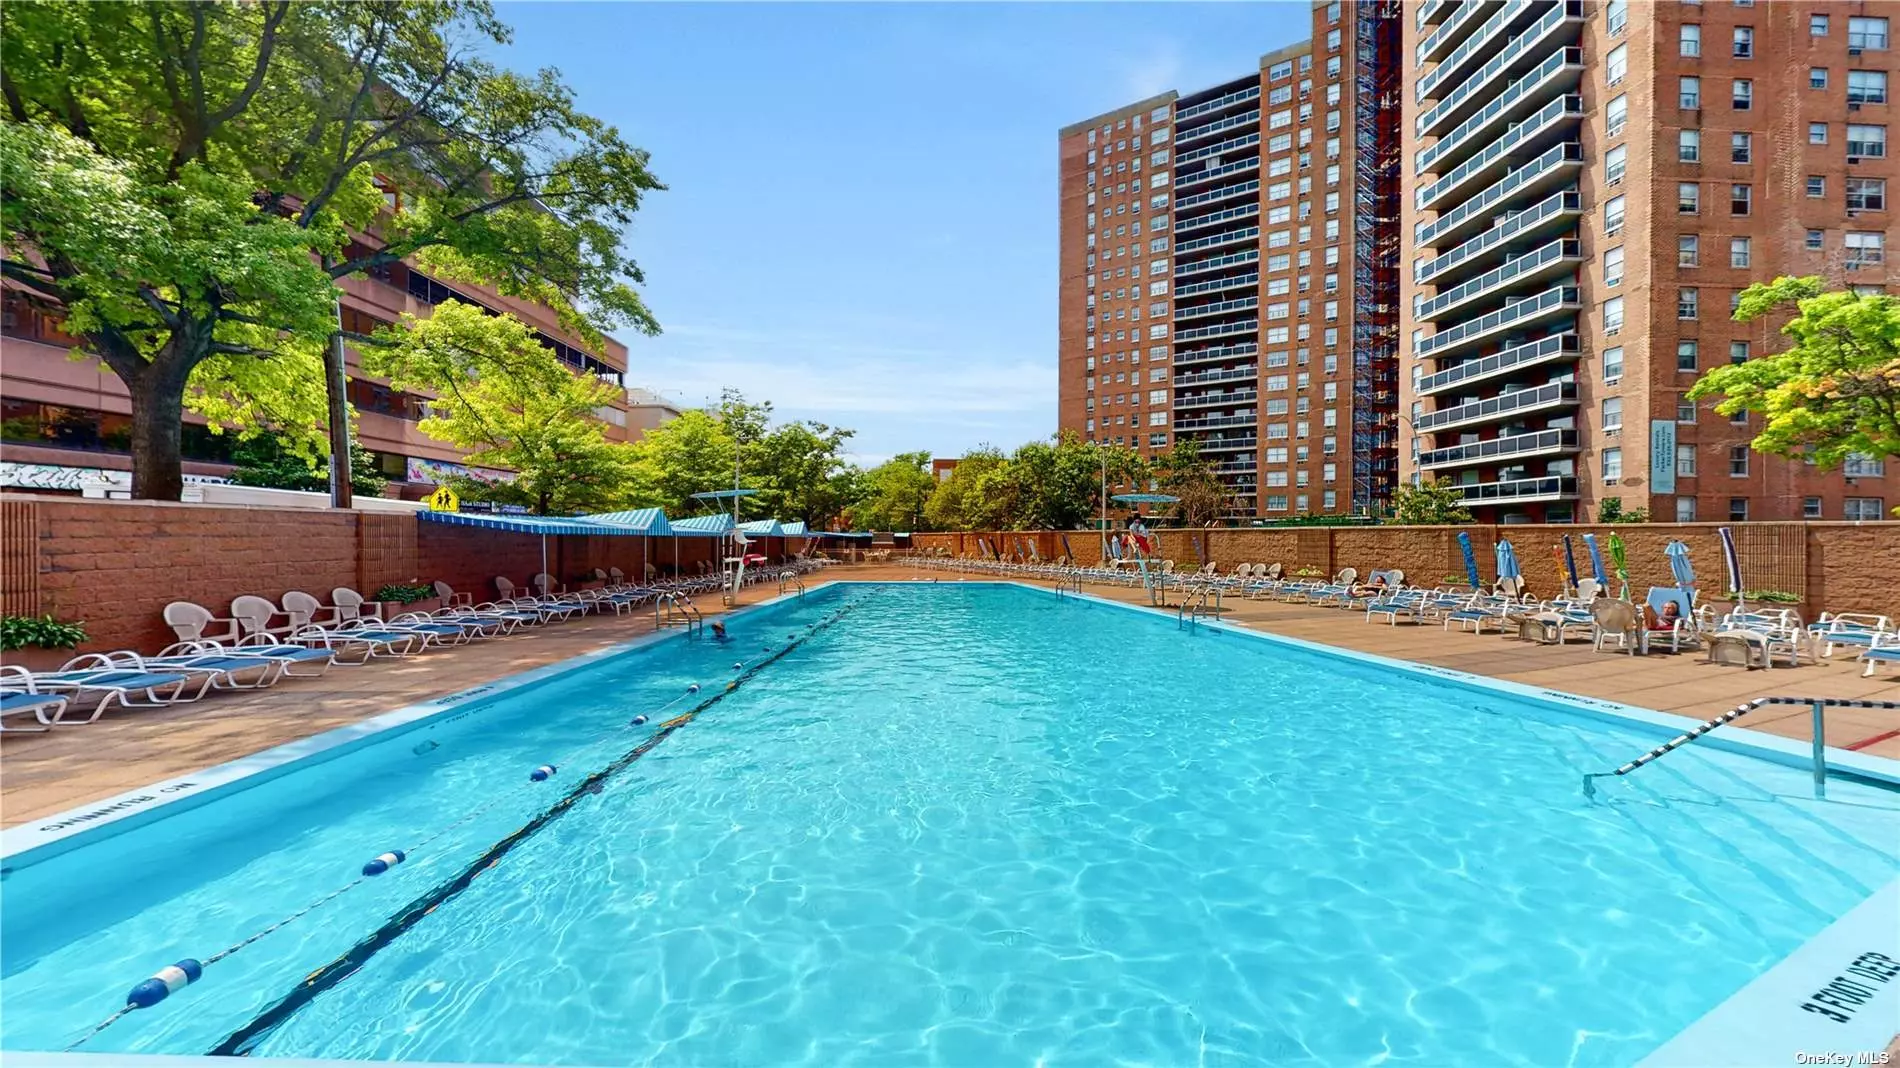 Large, FULLY Renovated 2BR/2 Baths, located in the Heart of Forest Hills. Features: Eat-in-Kitchen with S/S Appliances, Polished Wood Floors. This Luxury Building have amenities: 24-hour Doorman, Gym, I/G Pool, Children&rsquo;s Playroom, Valet Parking, Laundry Room. Near Subways, Buses, LIRR., Restaurants, Supermarkets and Austin Street Shopping.